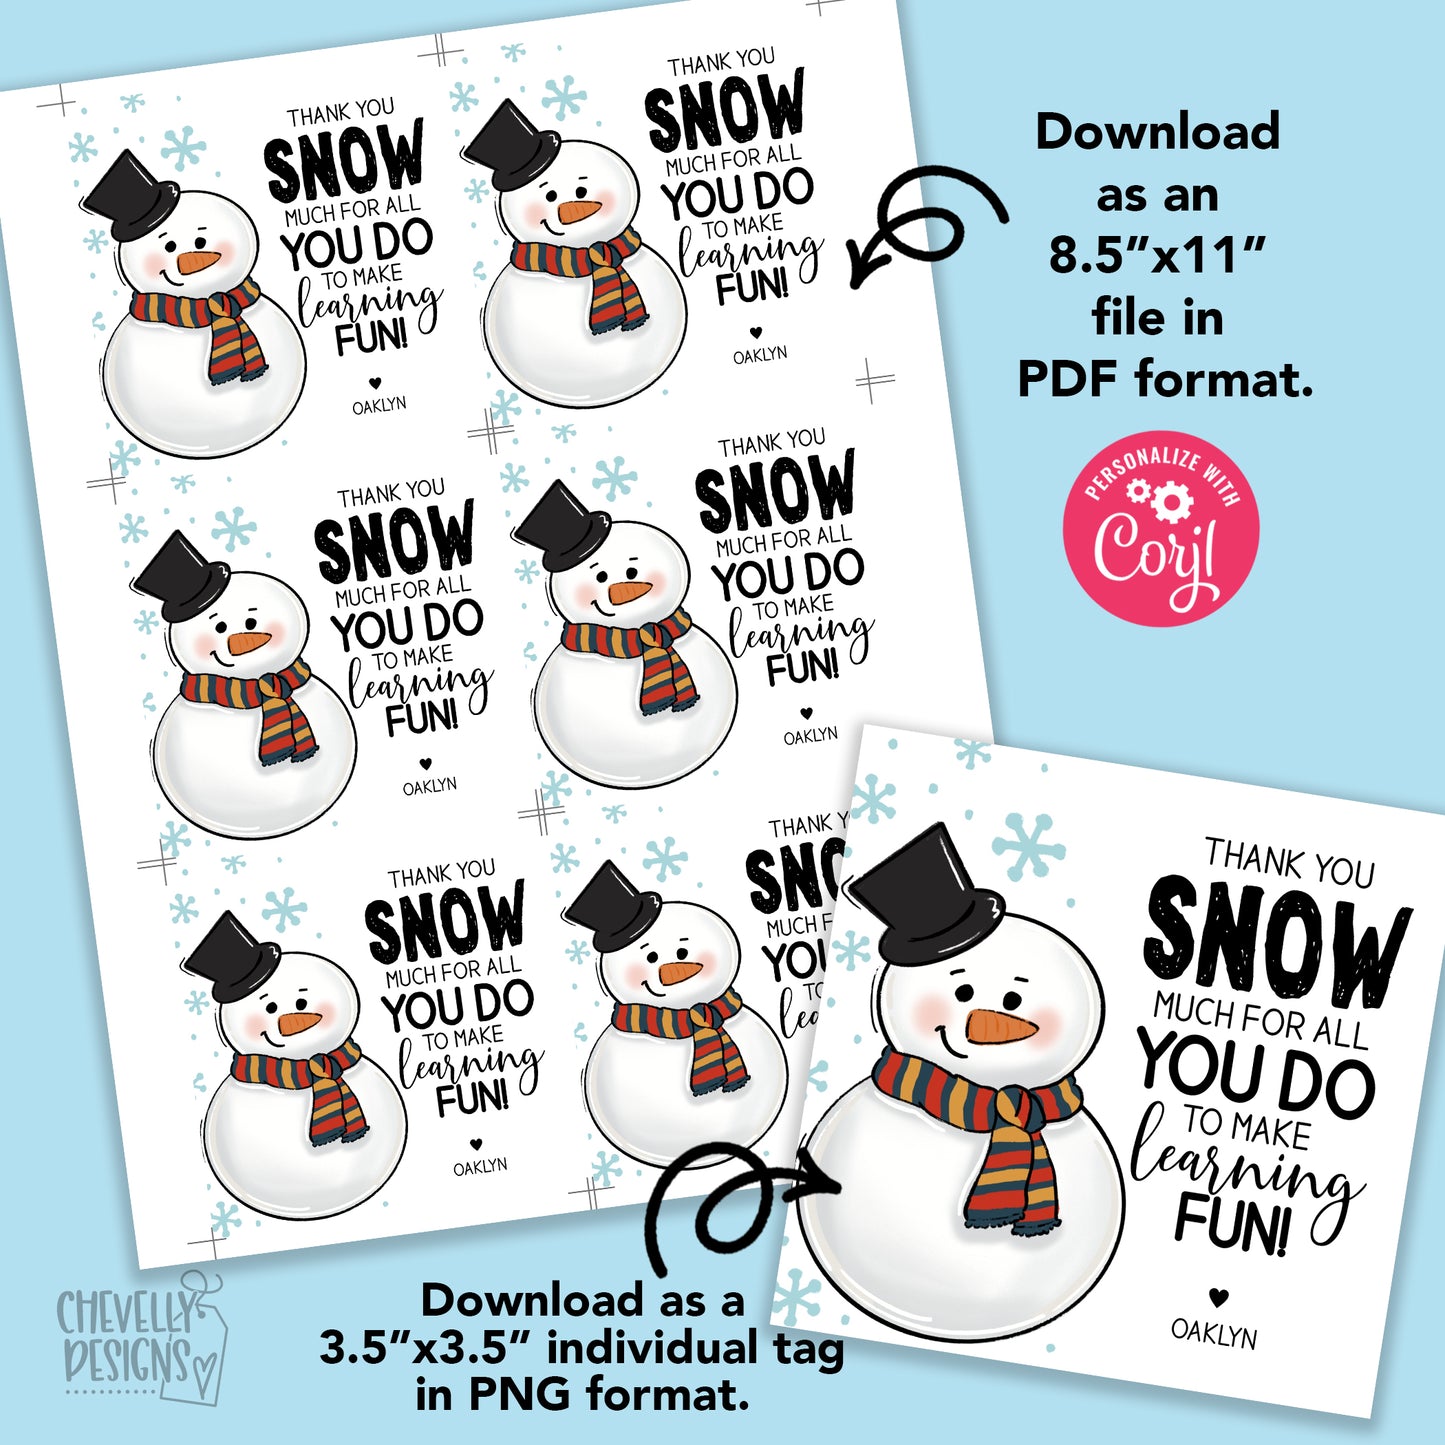 EDITABLE - Thank You Snow Much for All You Do - Teacher Treat Gift Tags - Printable Digital File